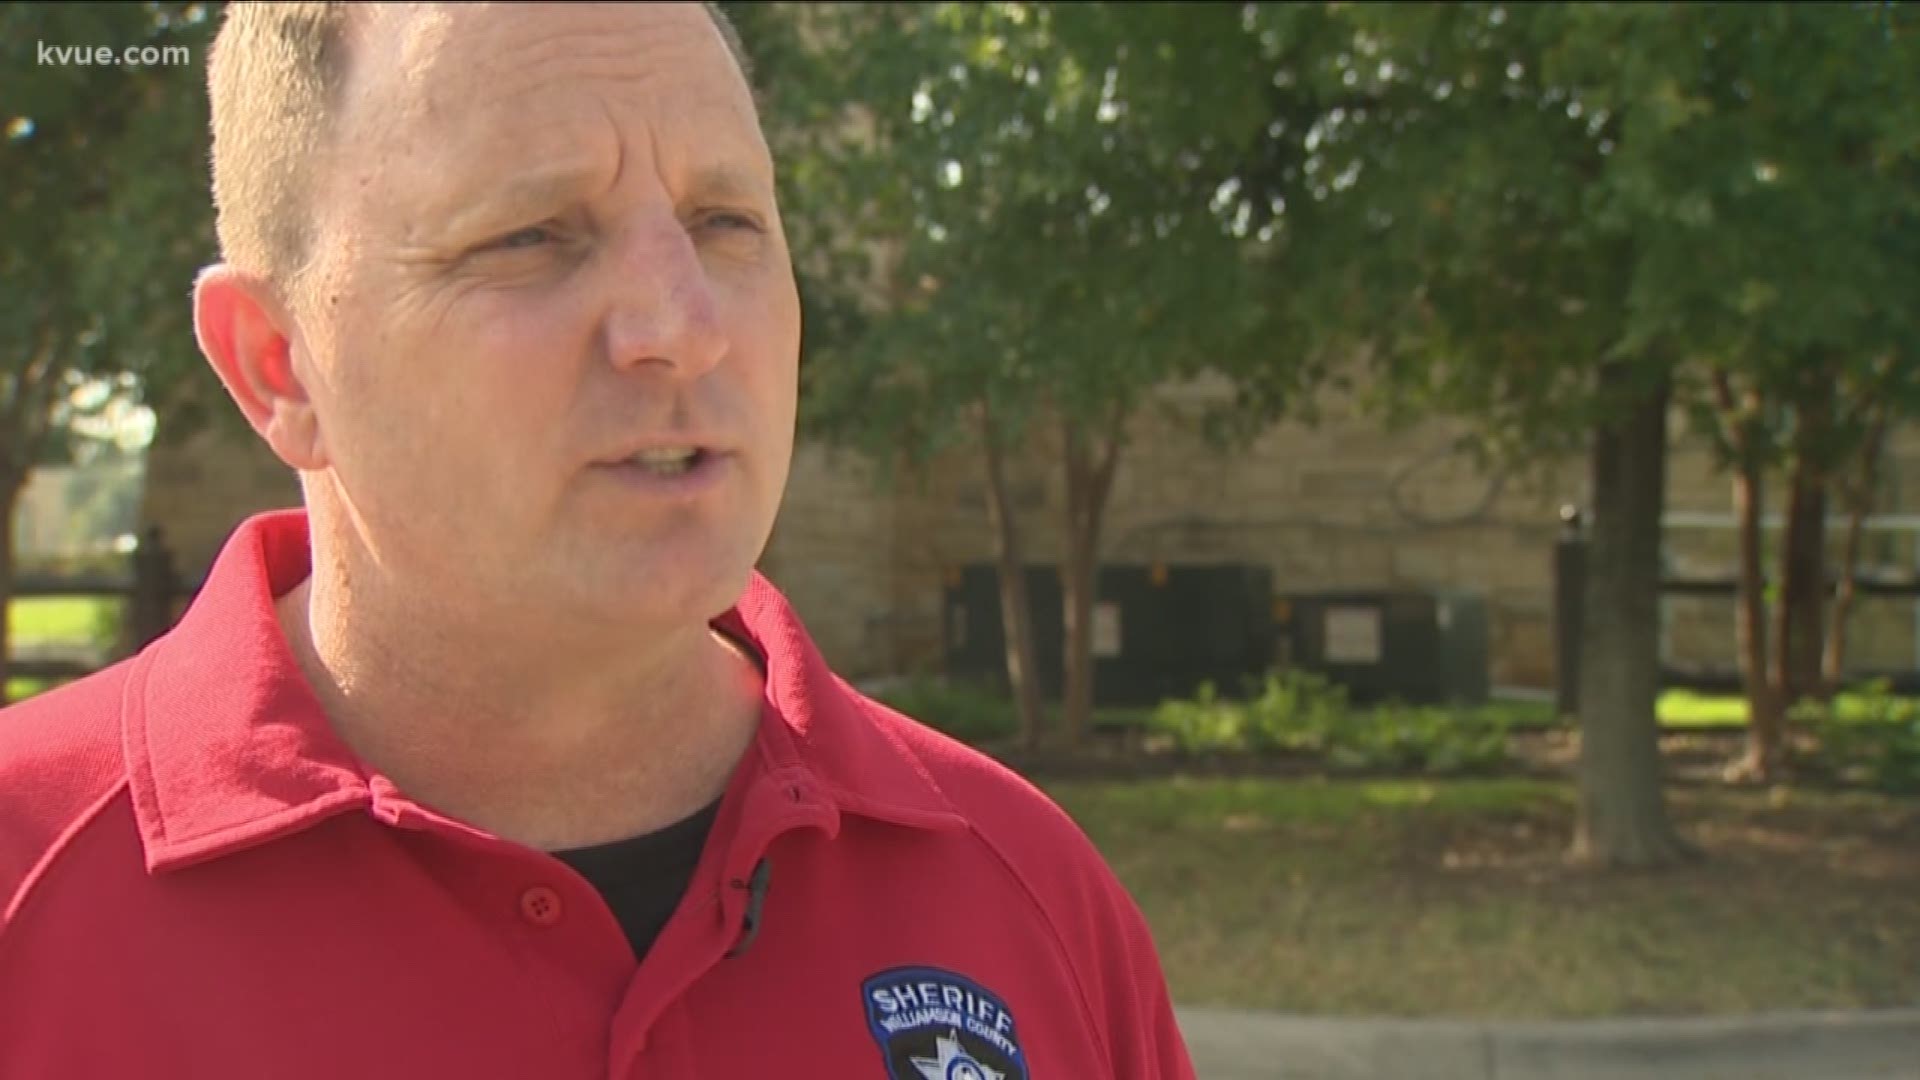 Williamson County's sheriff told everyone he is not happy with Austin's mayor.